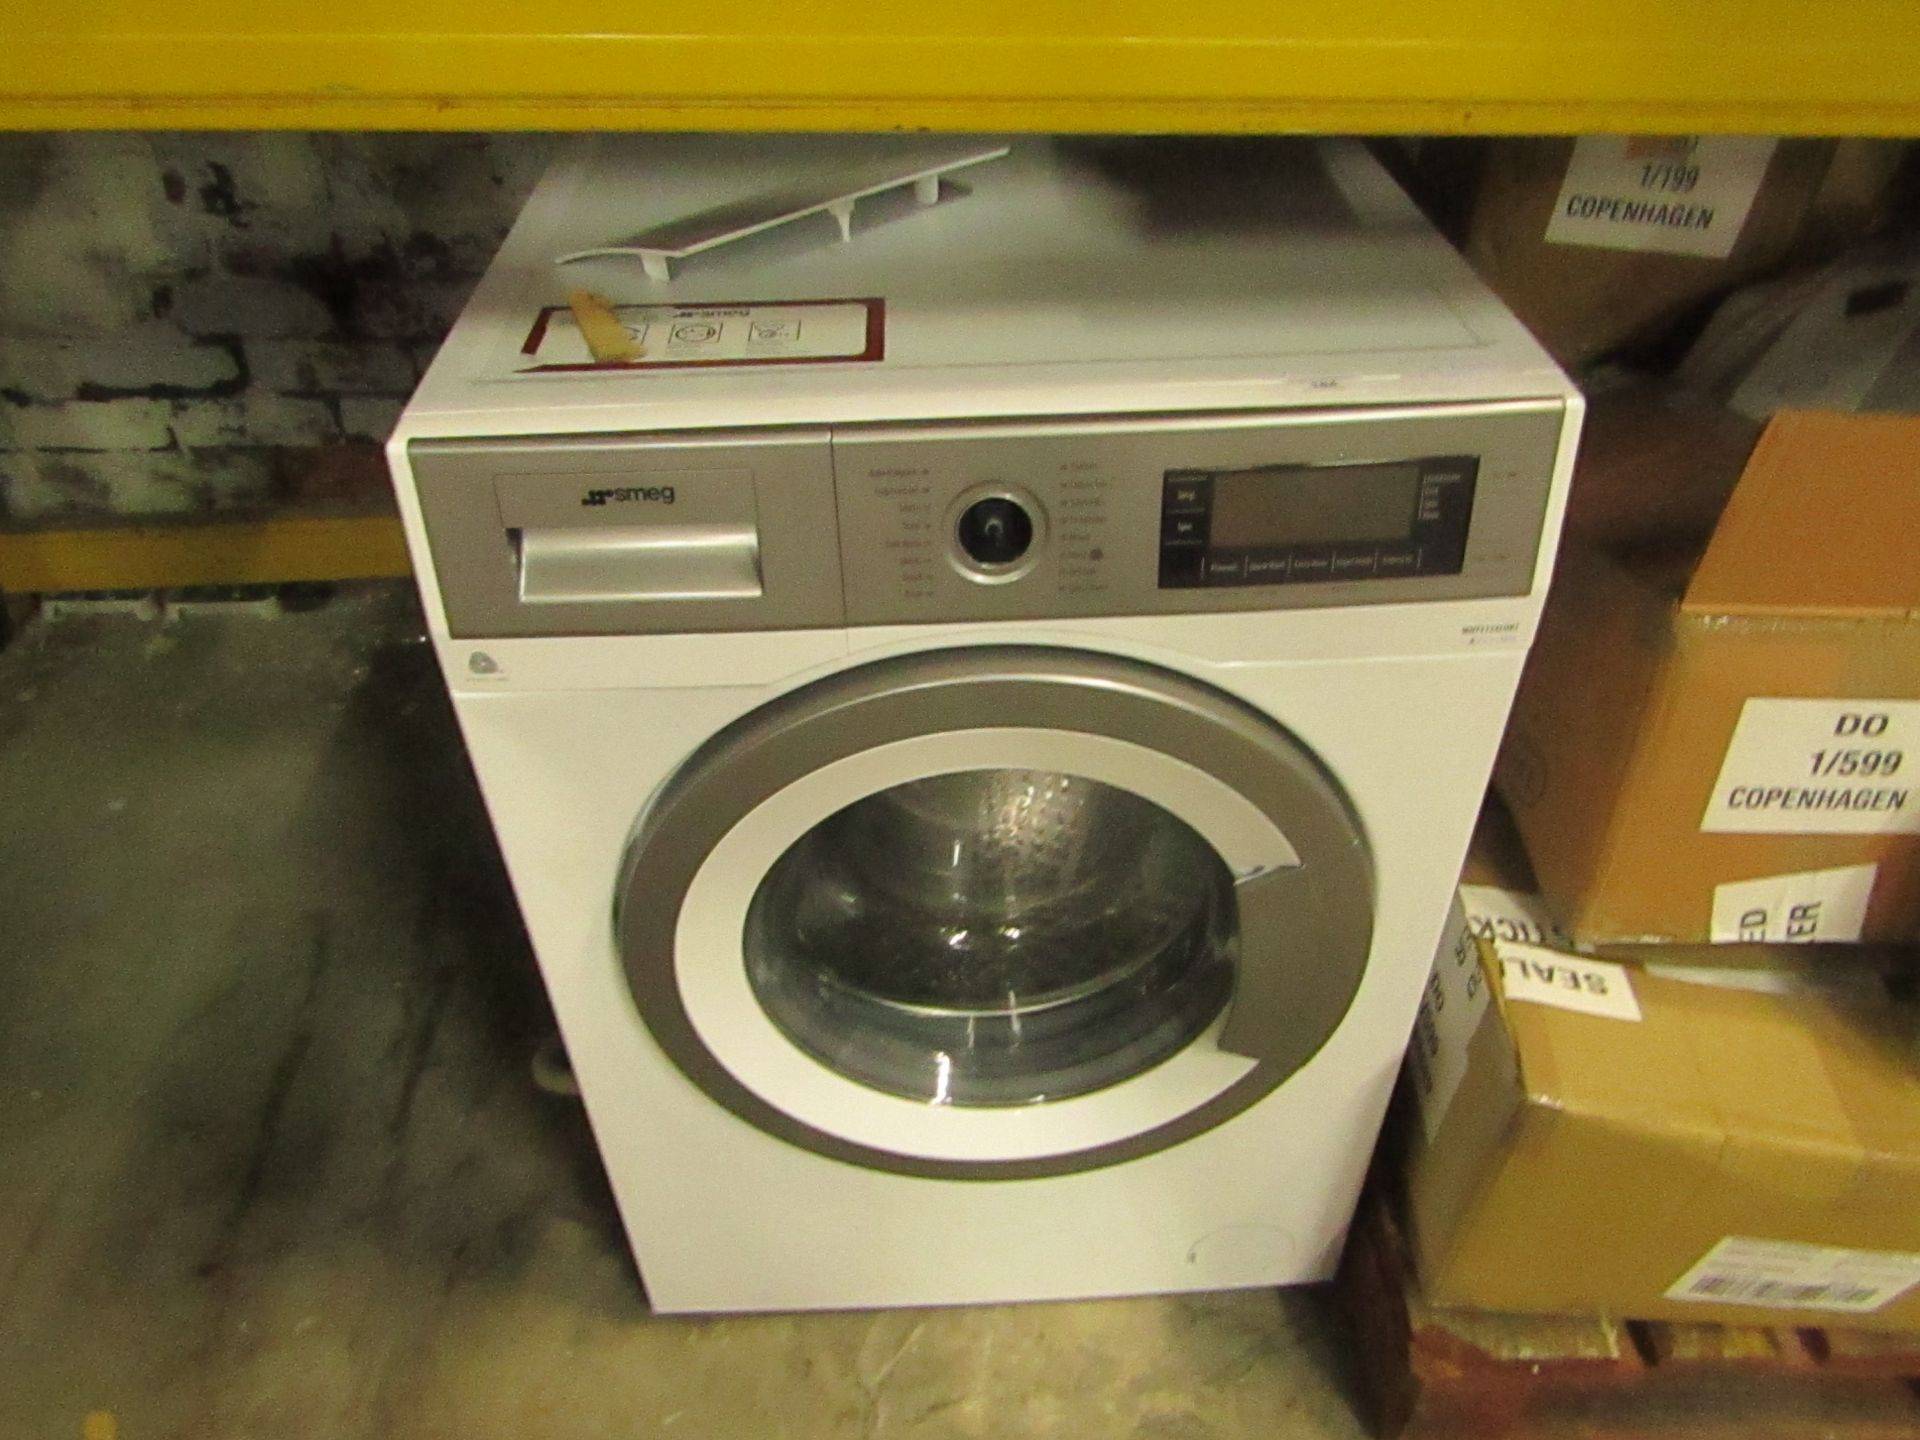 Smeg WHT1114LUK1 washing machine, powers on but knob is missing and does not appear to spin but we